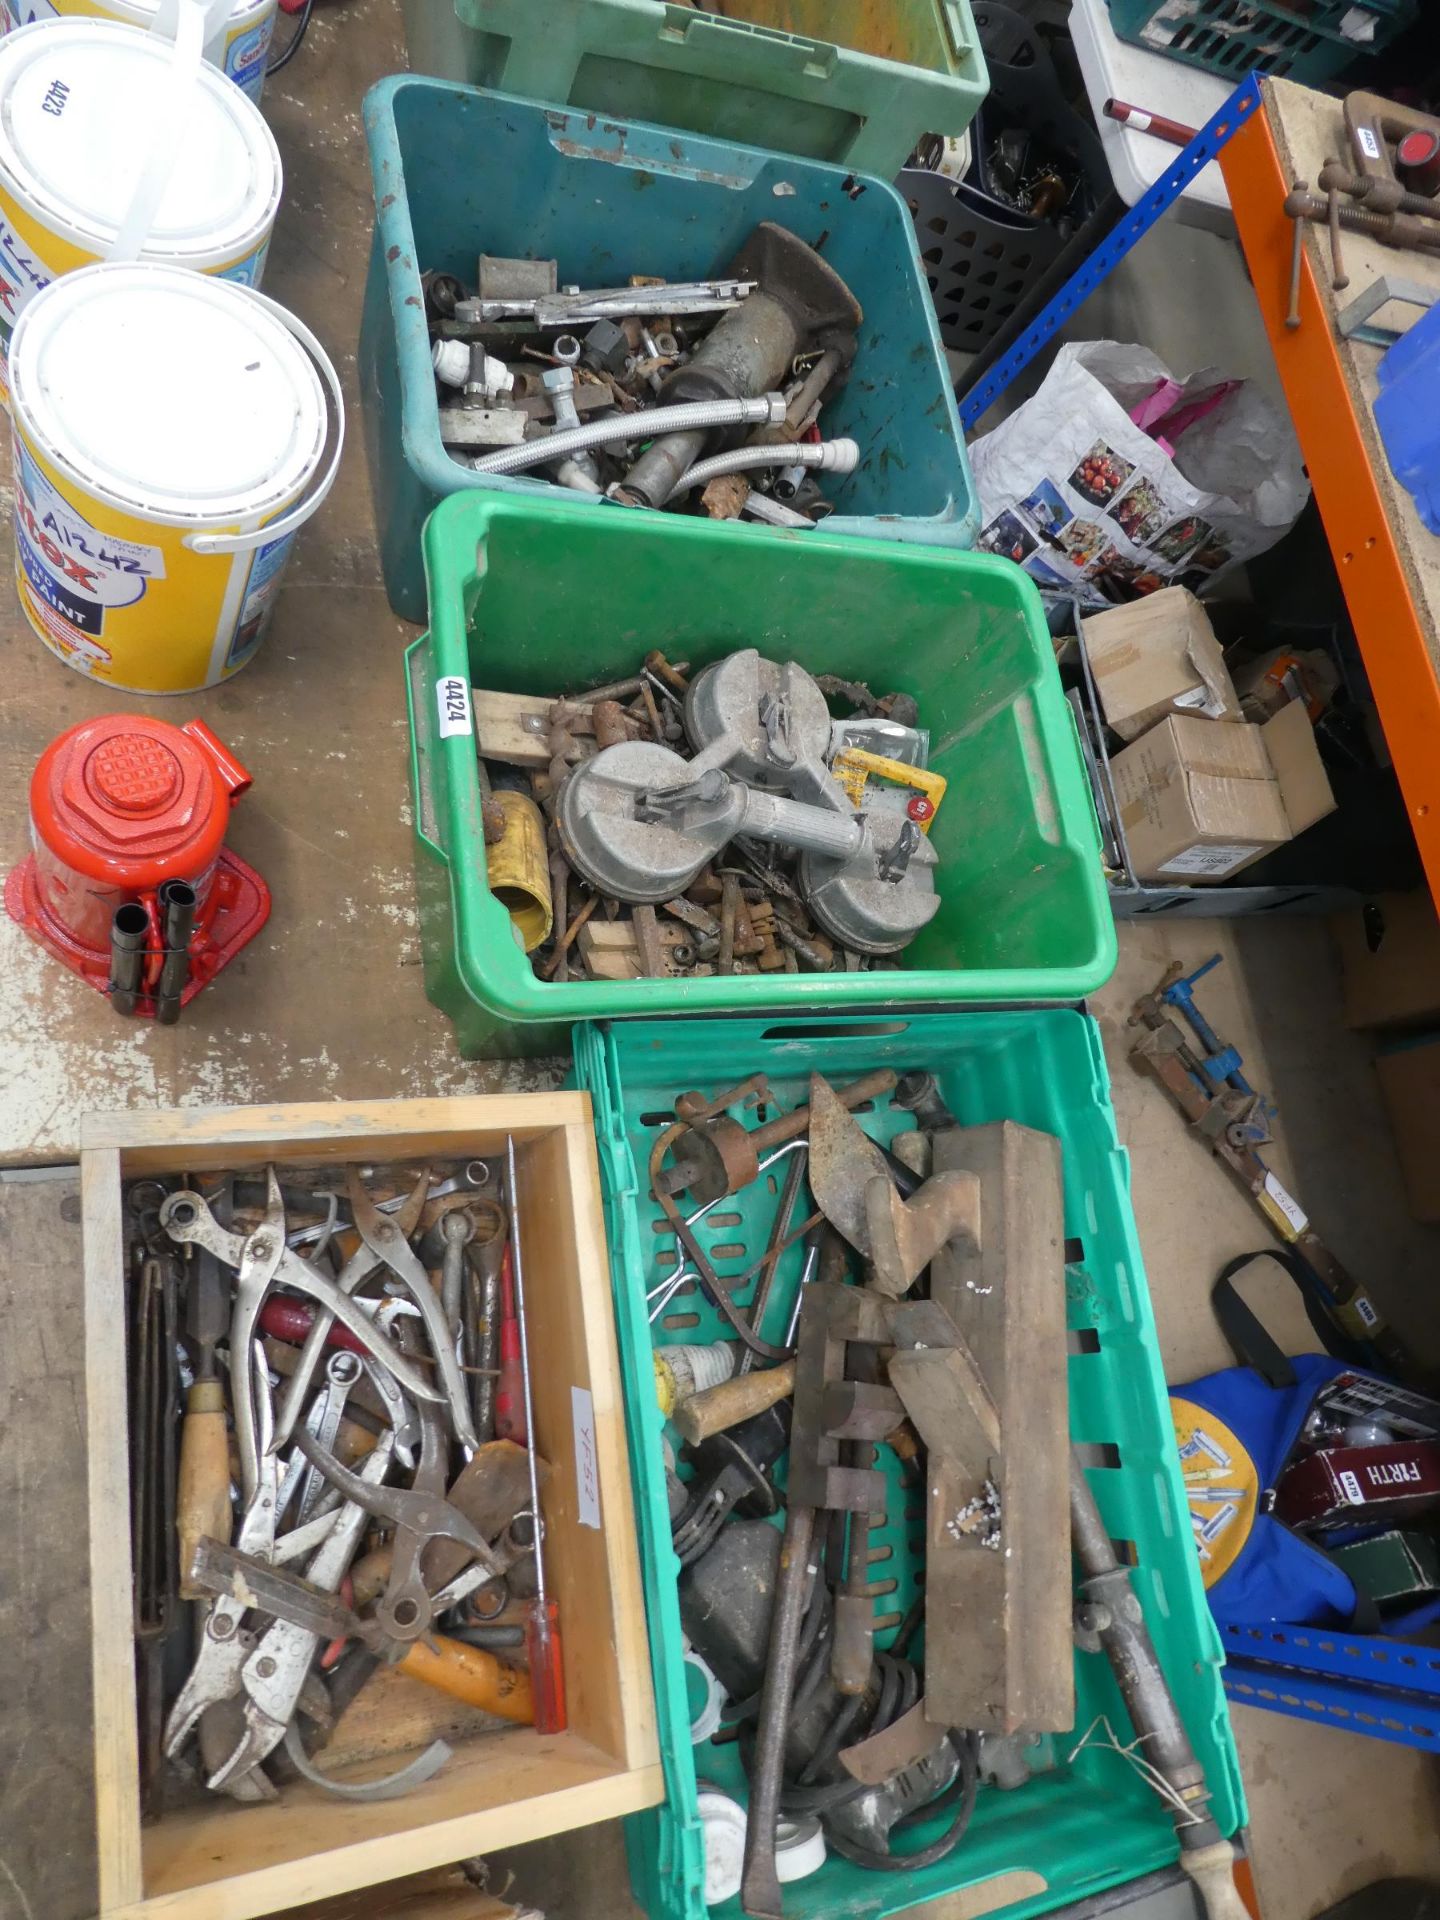 3 plastic and 1 wooden box of mixed tools, bolts, hoses, clamps, nails, etc